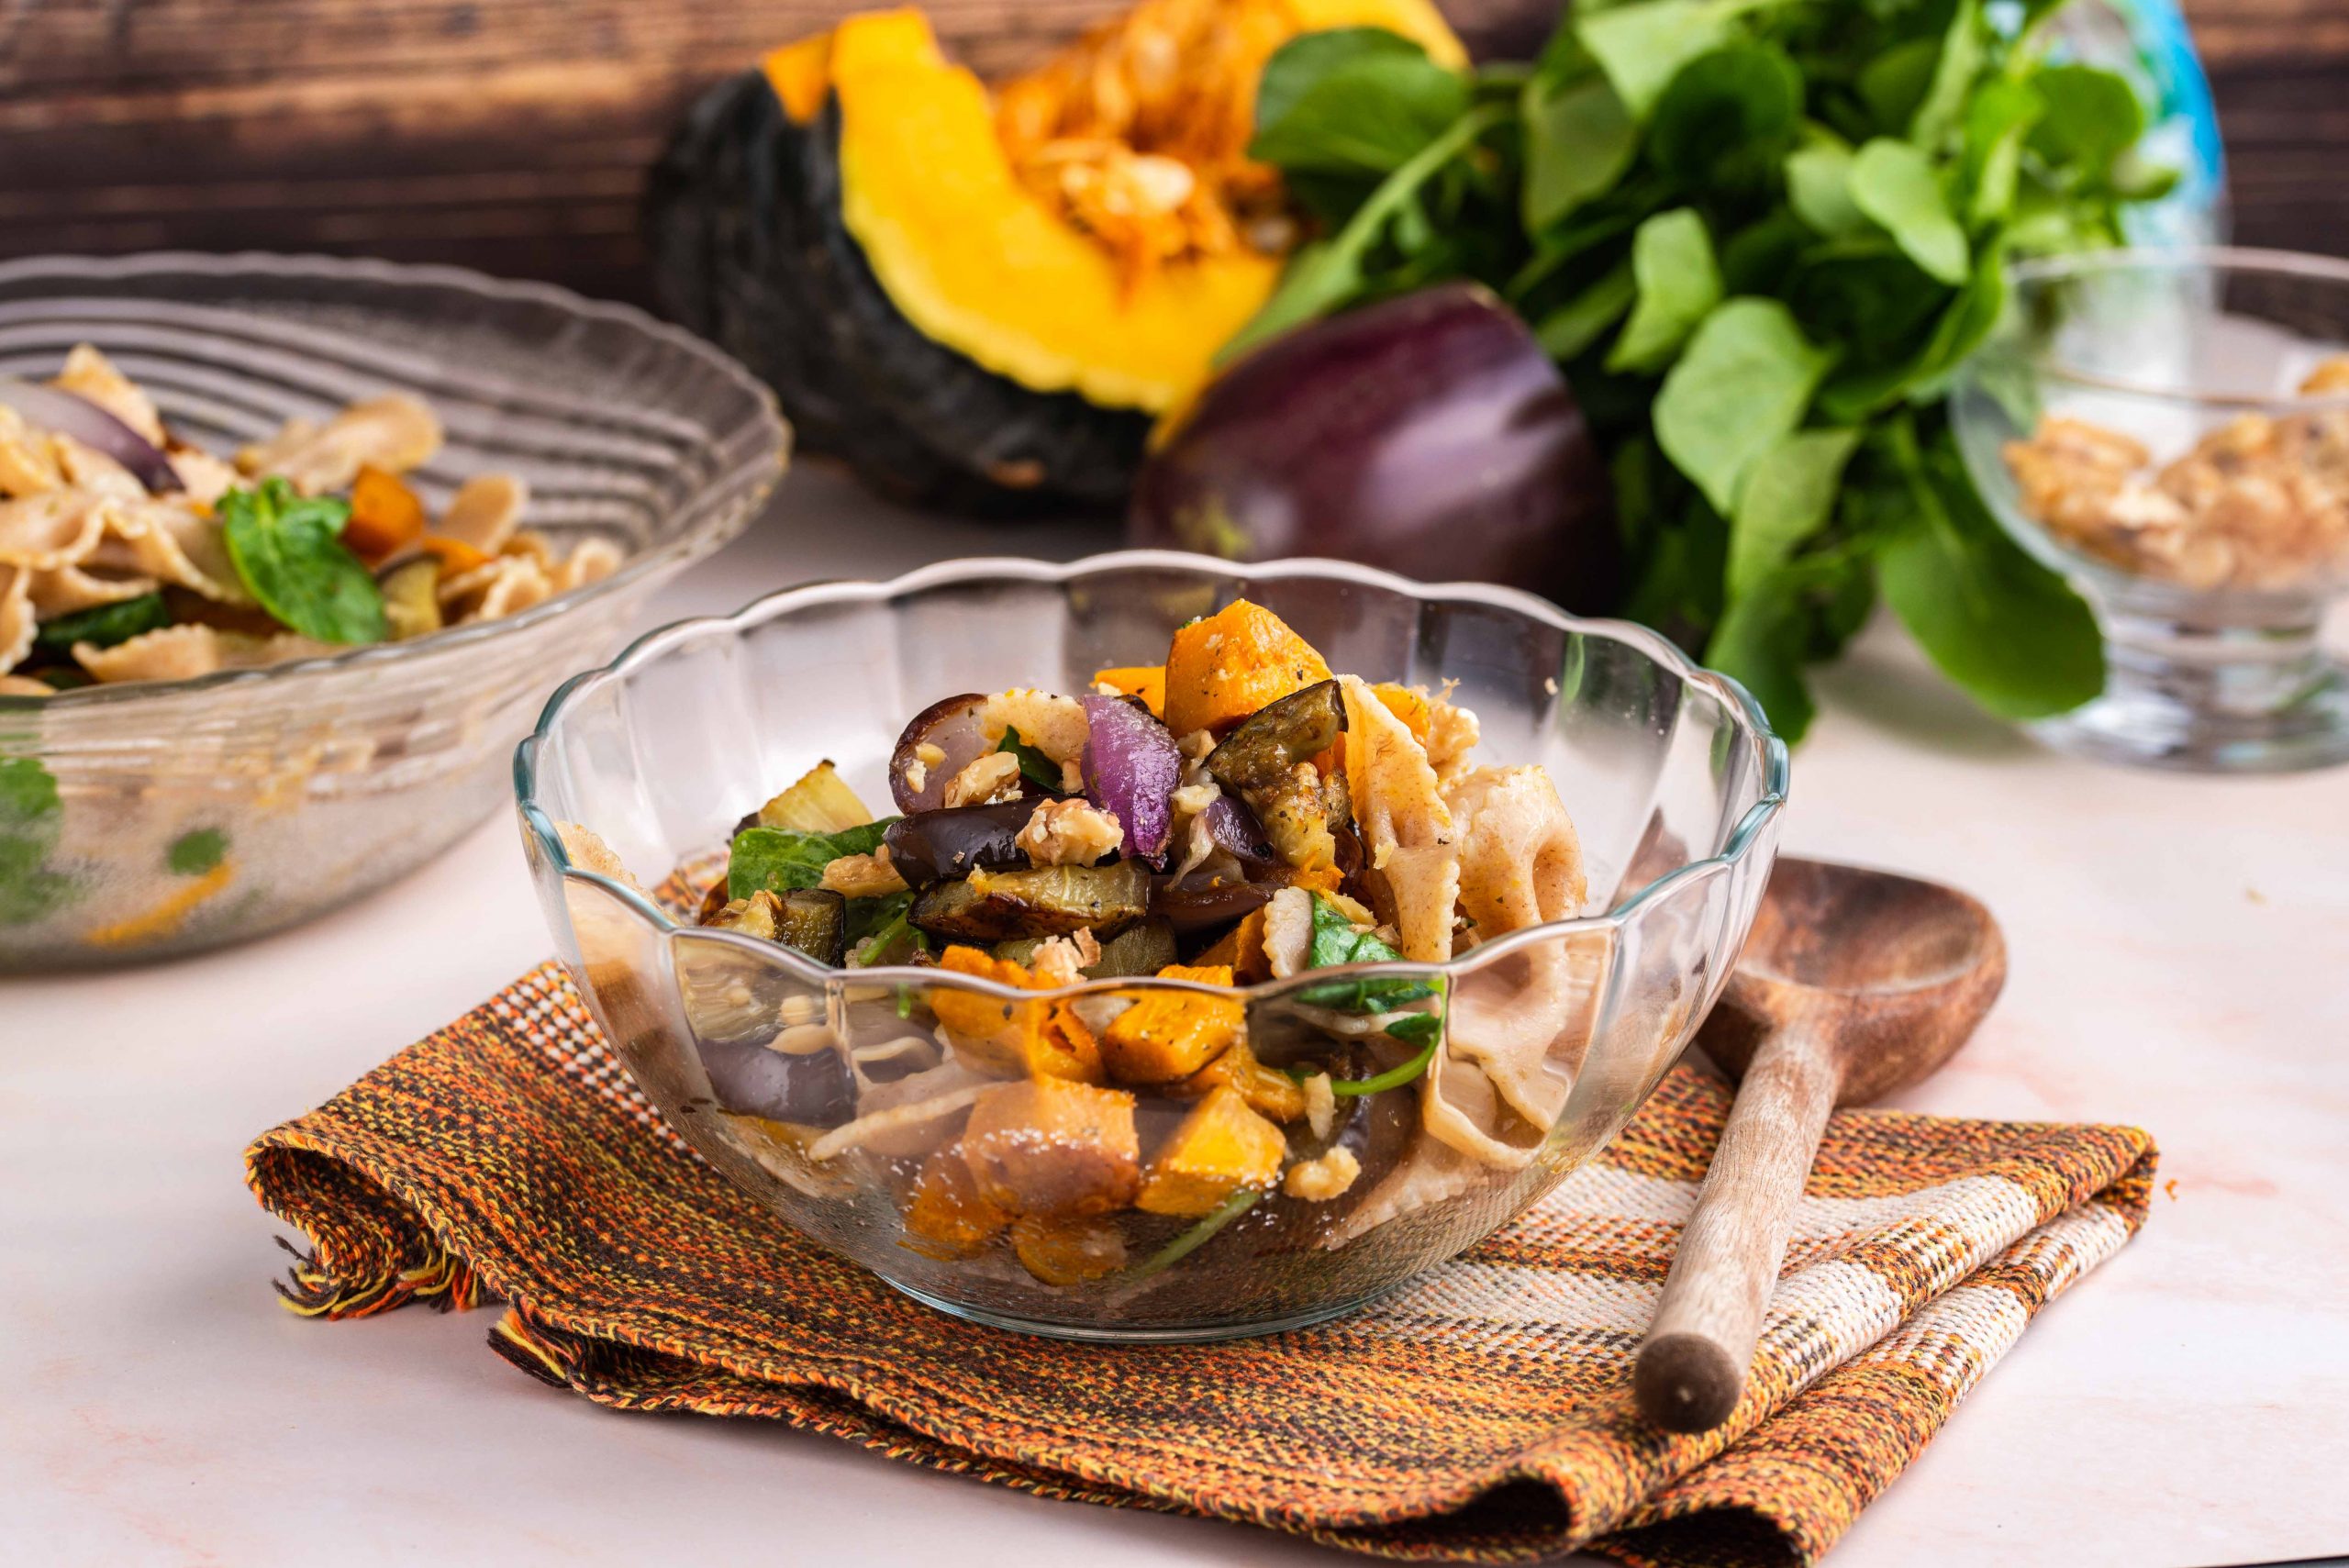 bowl of roasted butternut squash and eggplant pasta